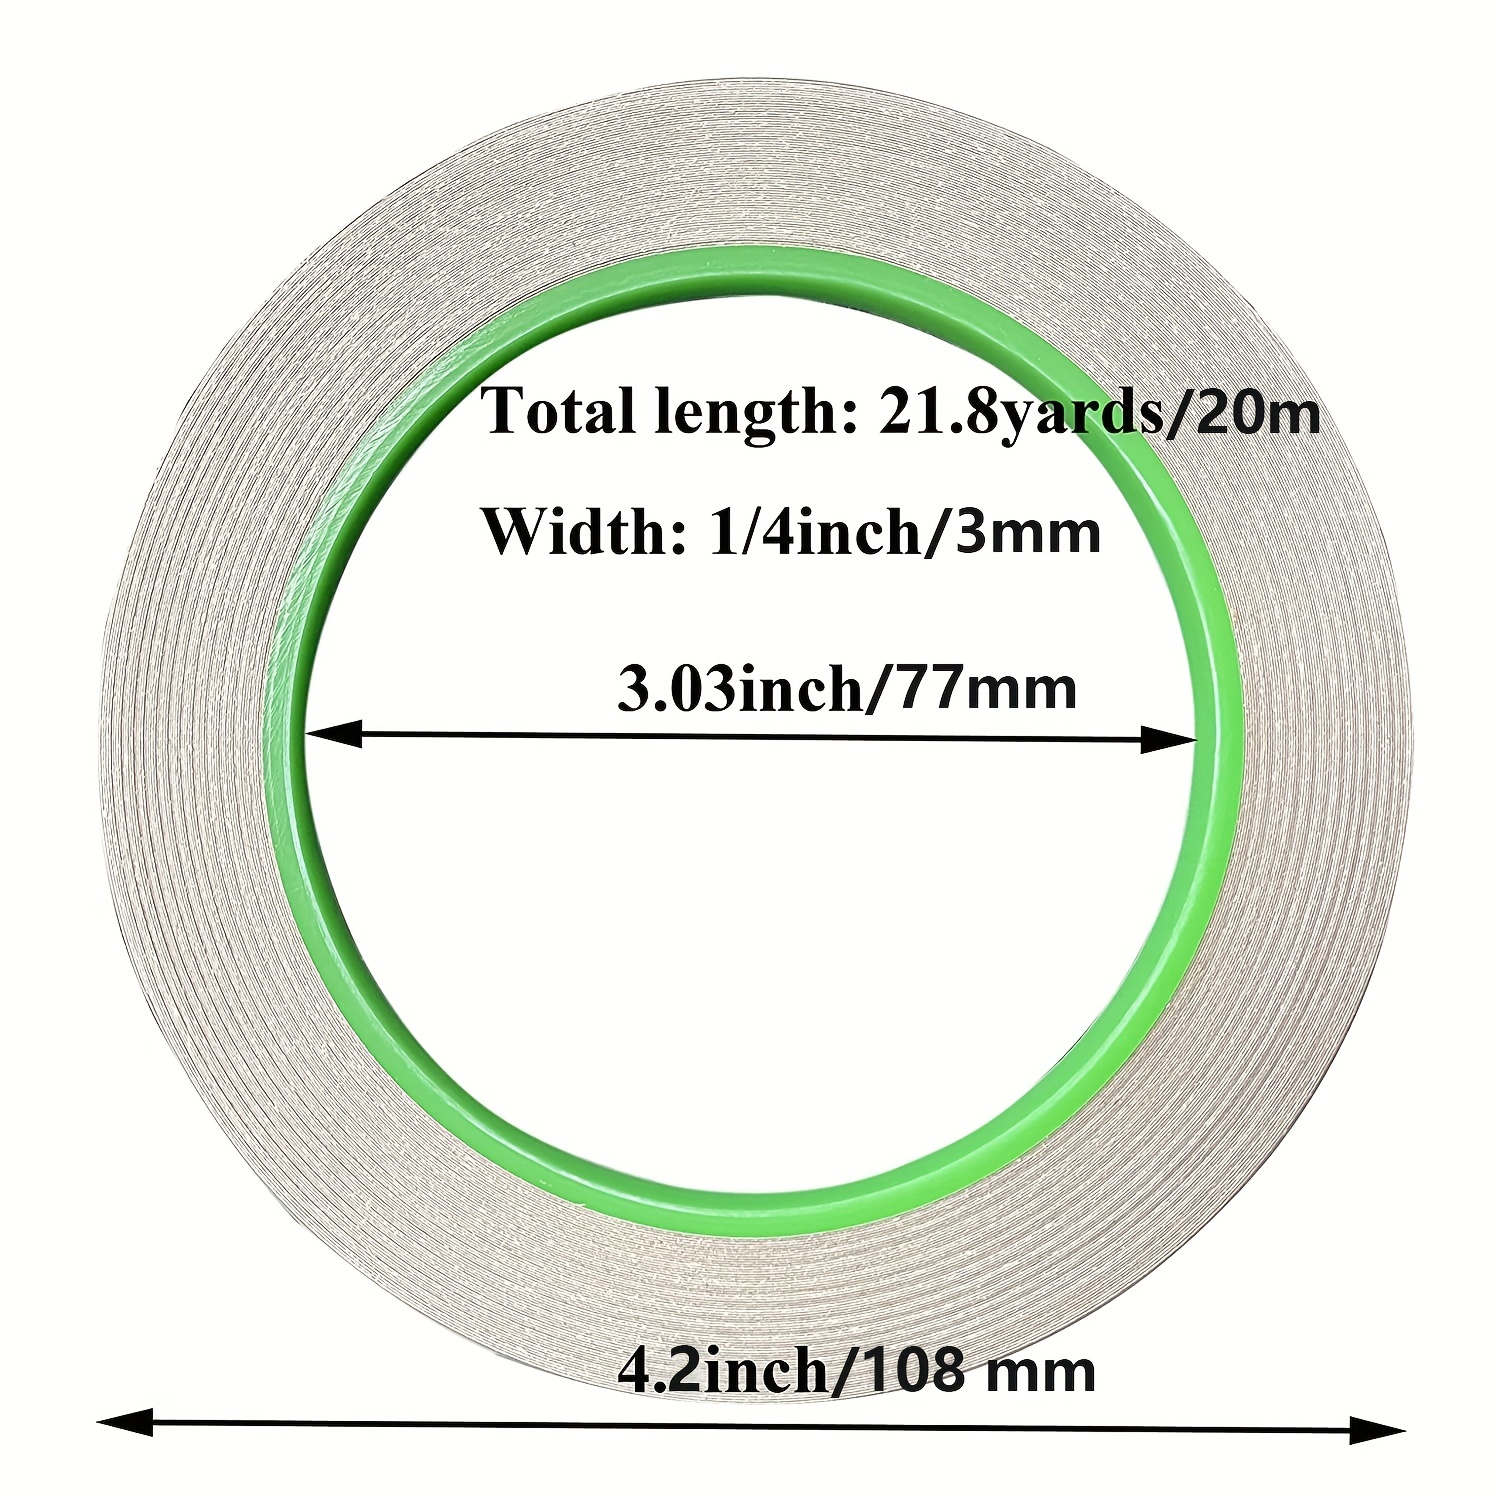 3M Copper Conducting Tape Code 1182, Double Sided Adhesive, Z05085